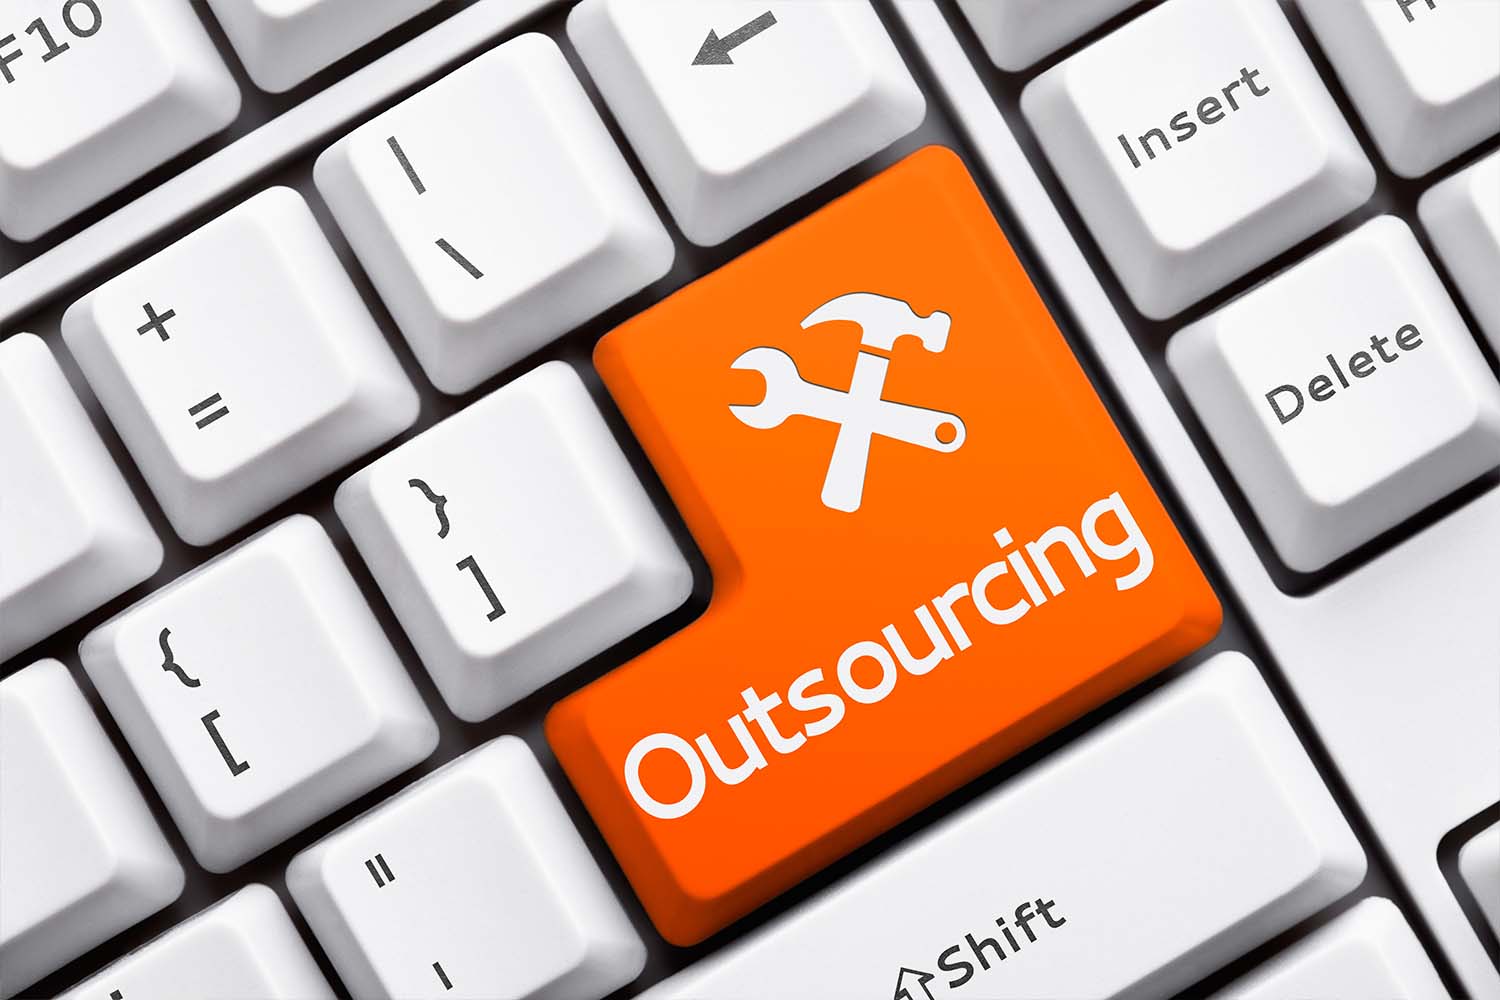 Guide to Business Process Outsourcing (BPO)